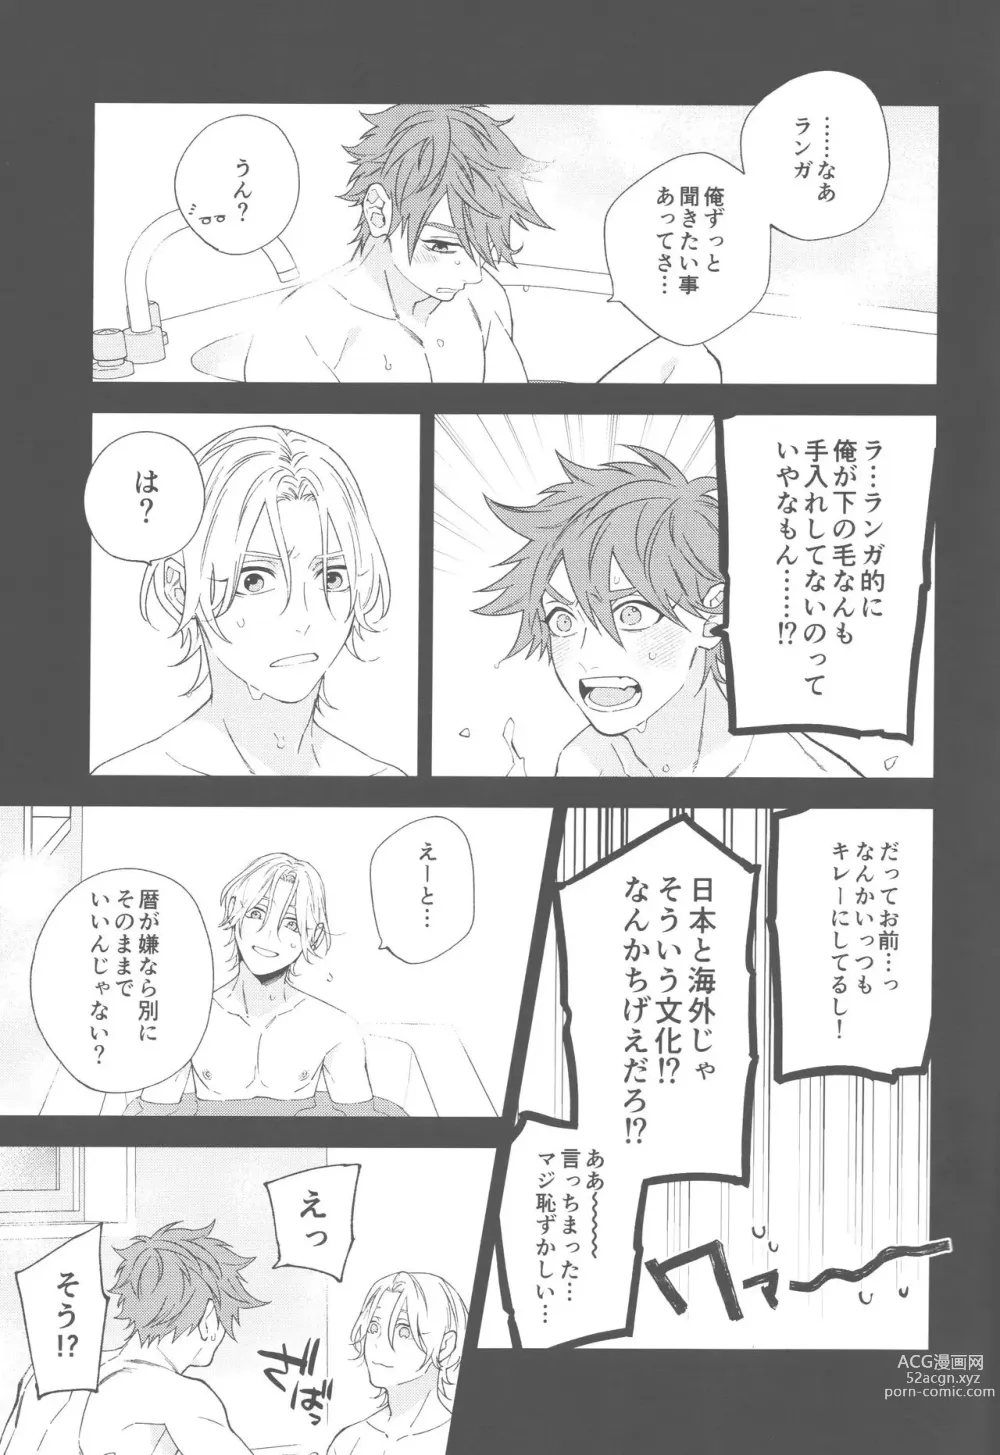 Page 6 of doujinshi SHAVED